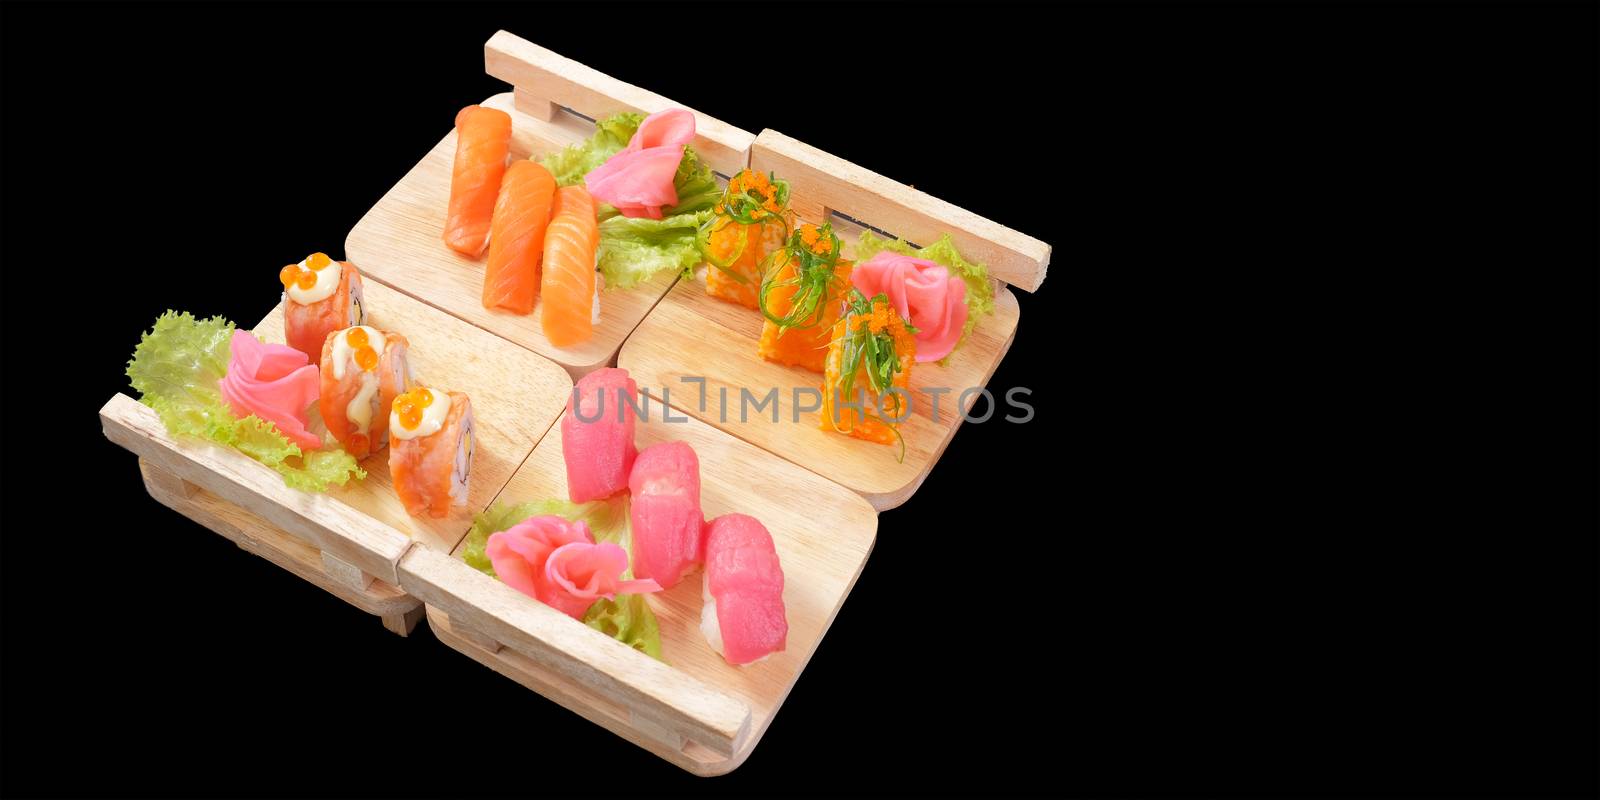 Japanese Cuisine - Sushi Roll on wood plate in black background and space for text